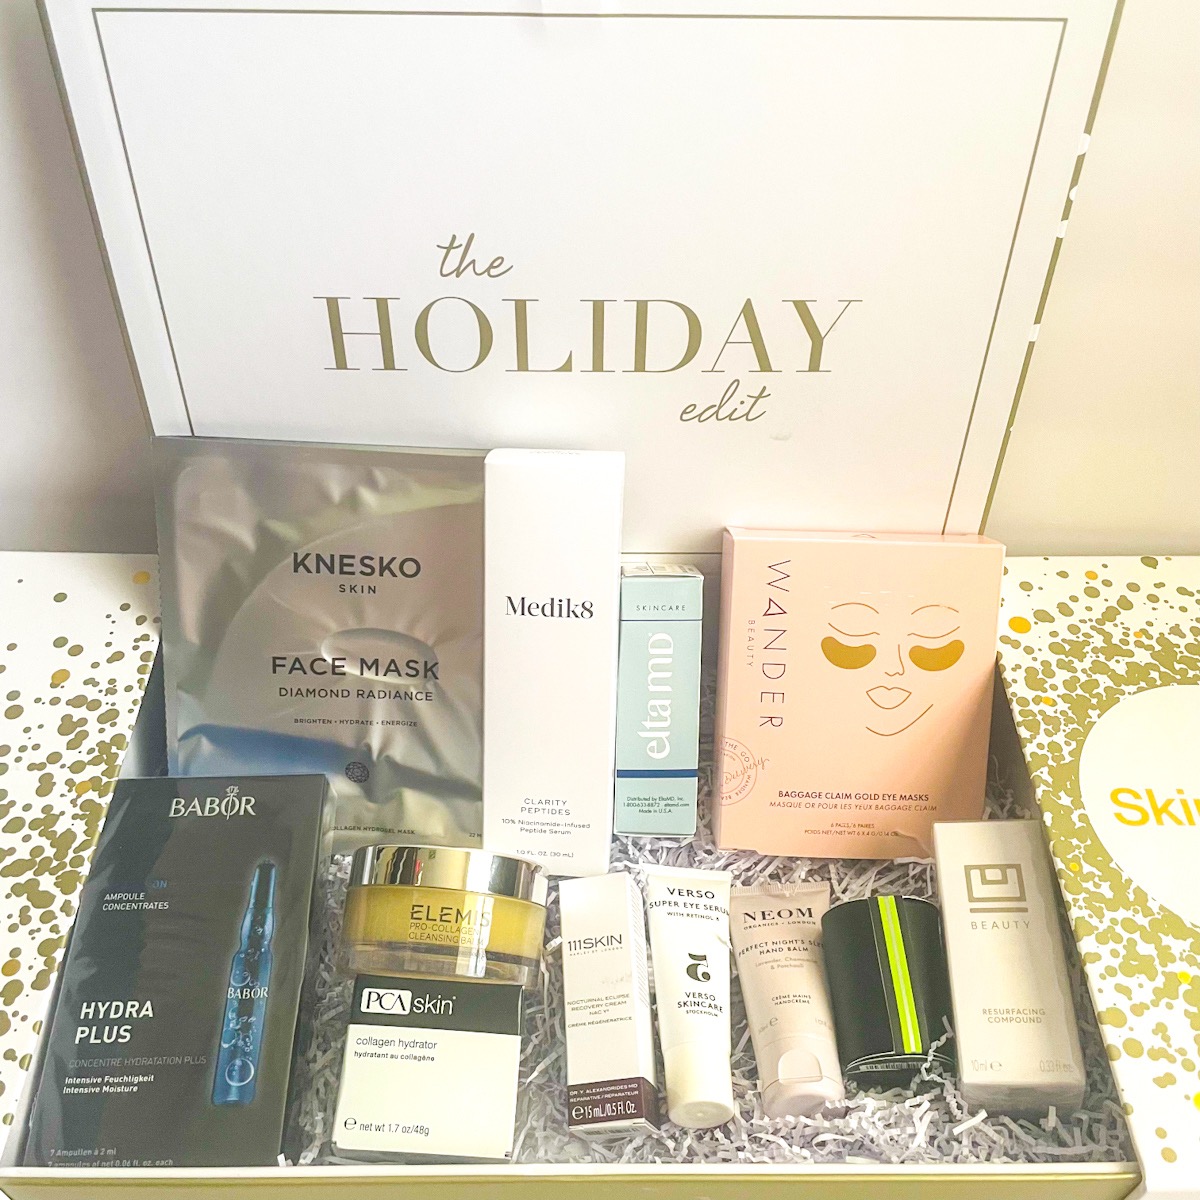 SkinStore Holiday Edit Limited Edition Box Review